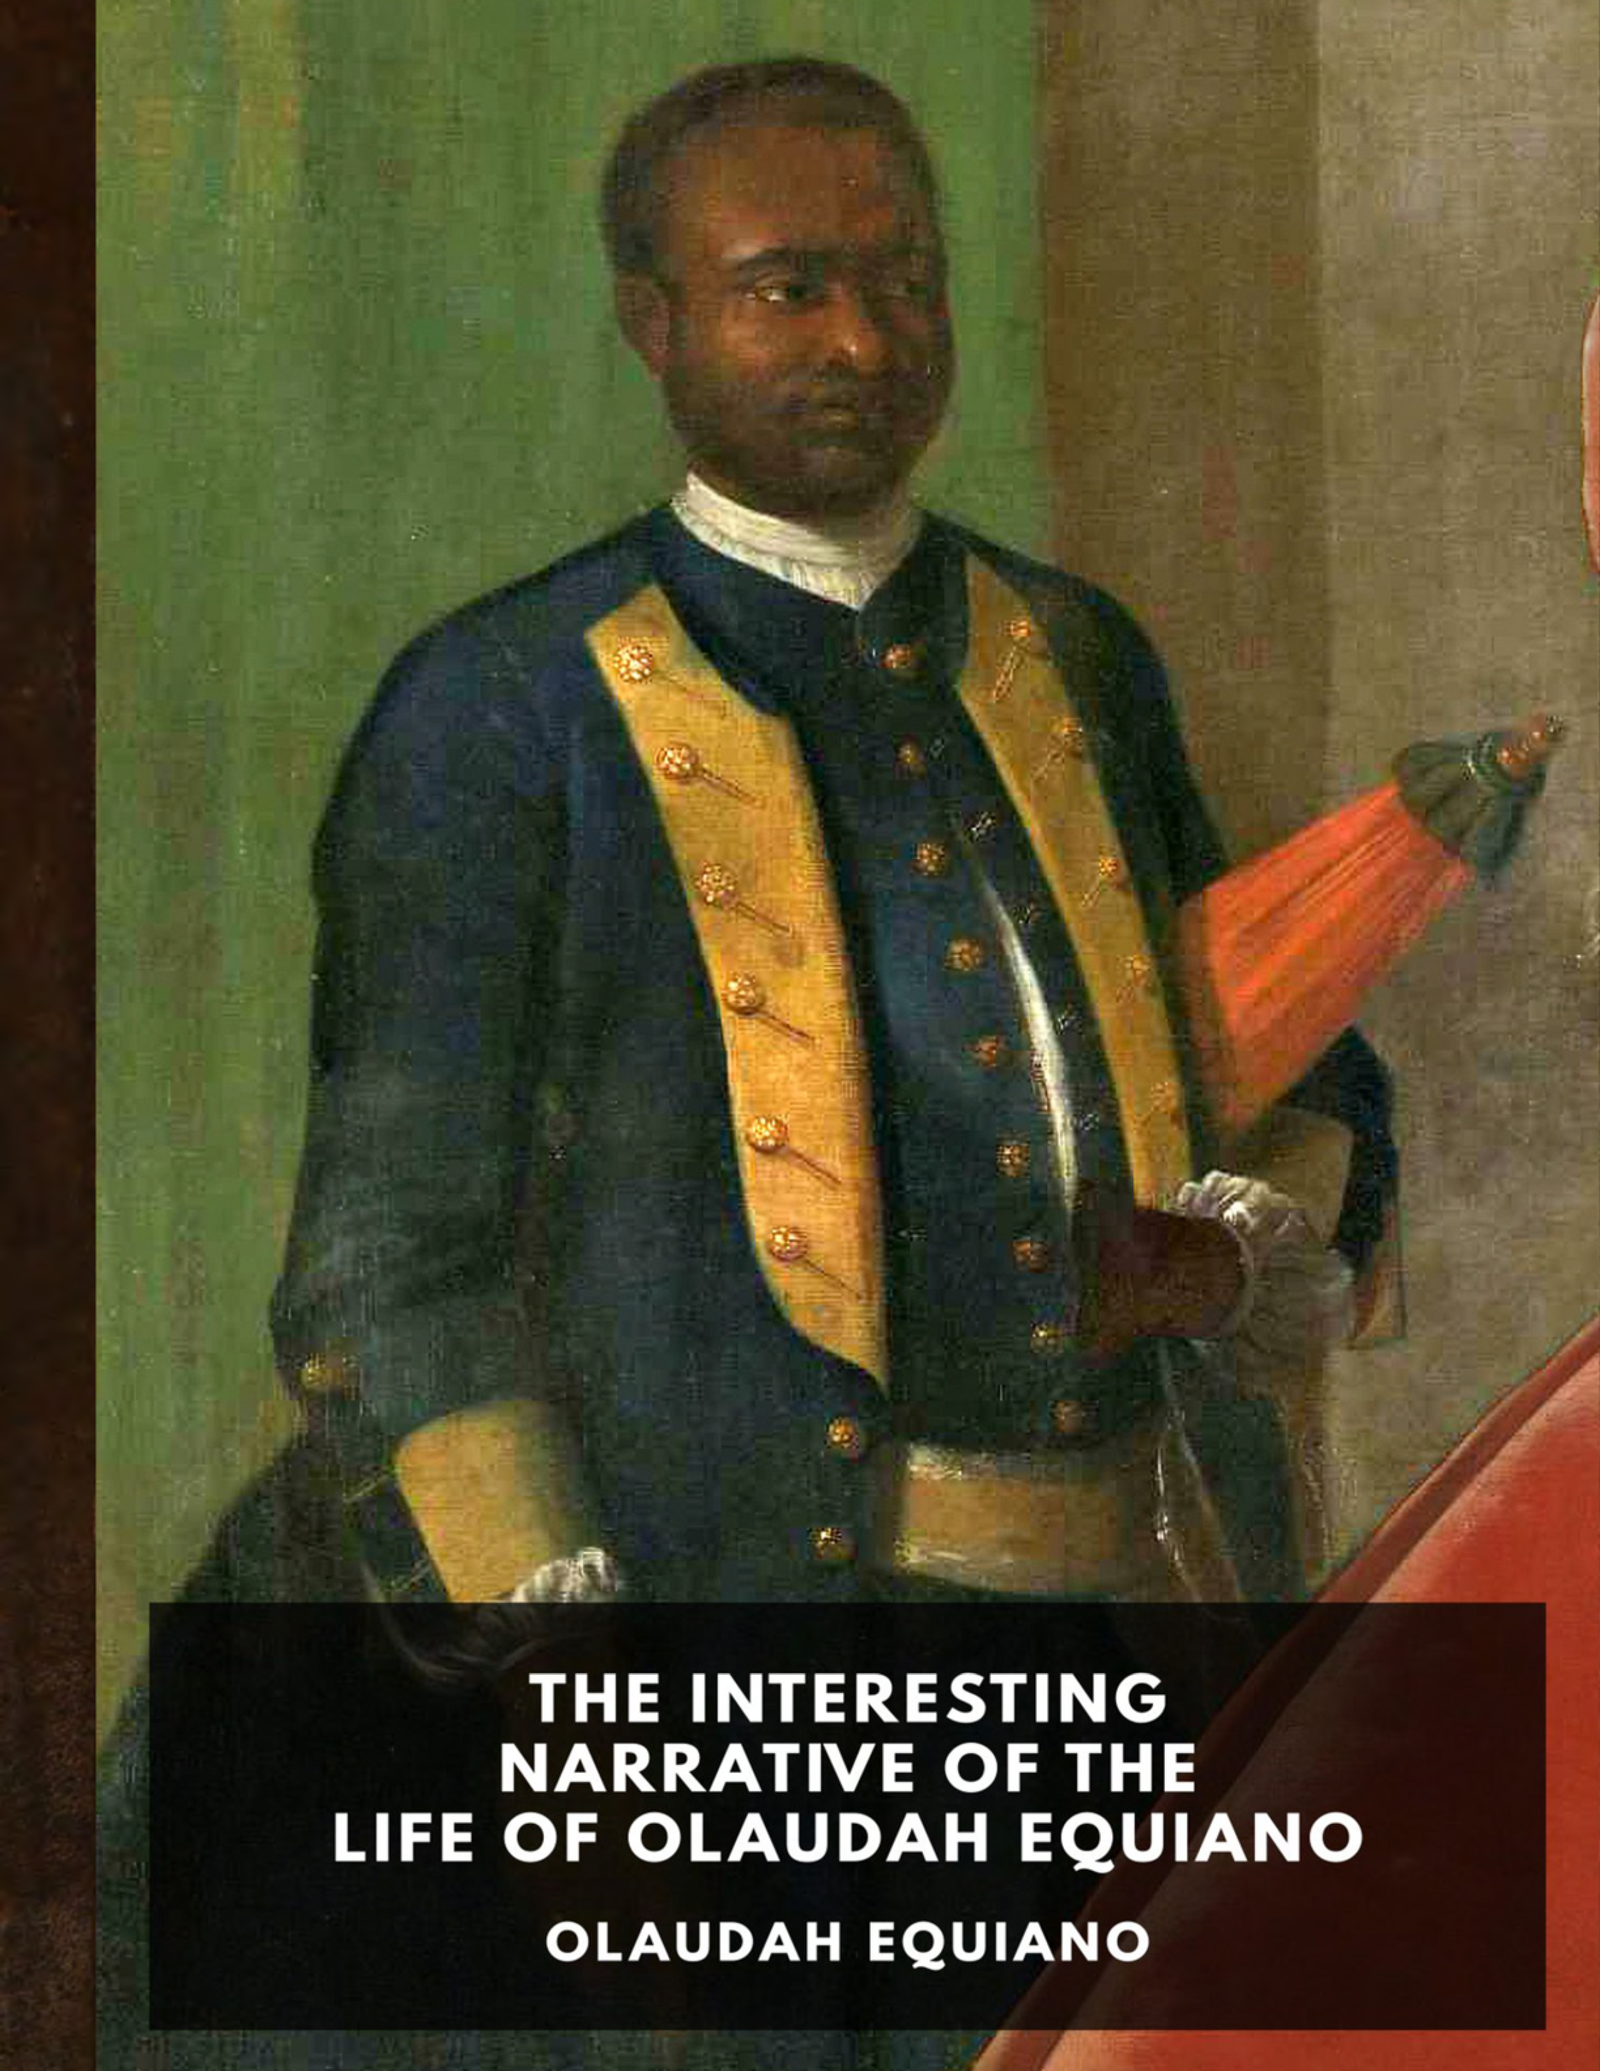 The Interesting Narrative of the life of Olaudah Equiano